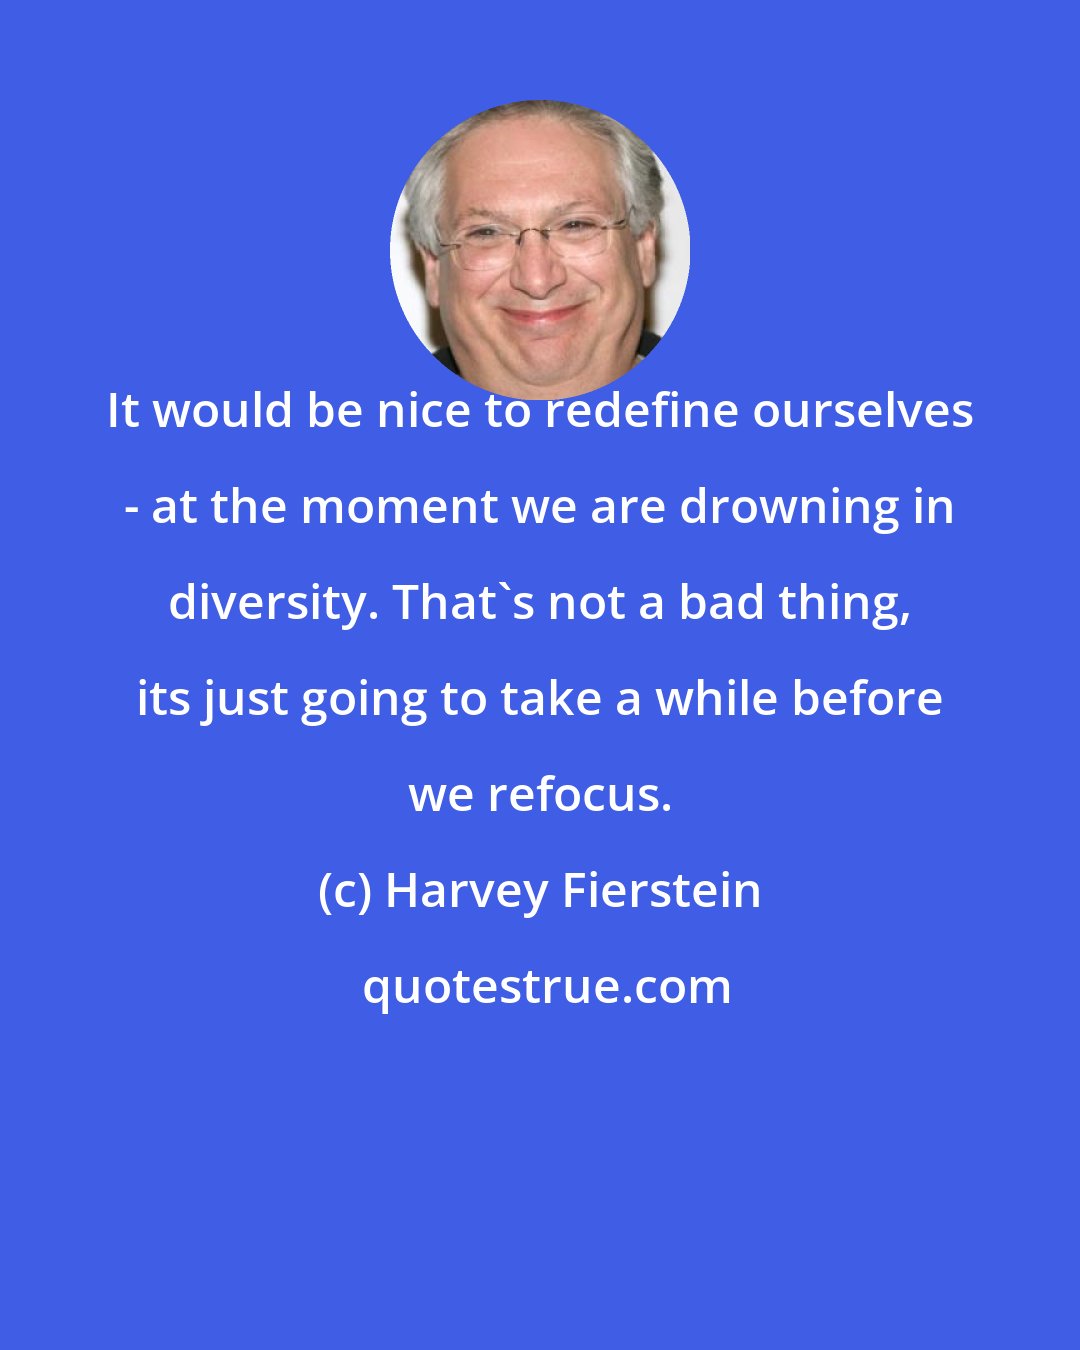 Harvey Fierstein: It would be nice to redefine ourselves - at the moment we are drowning in diversity. That's not a bad thing, its just going to take a while before we refocus.